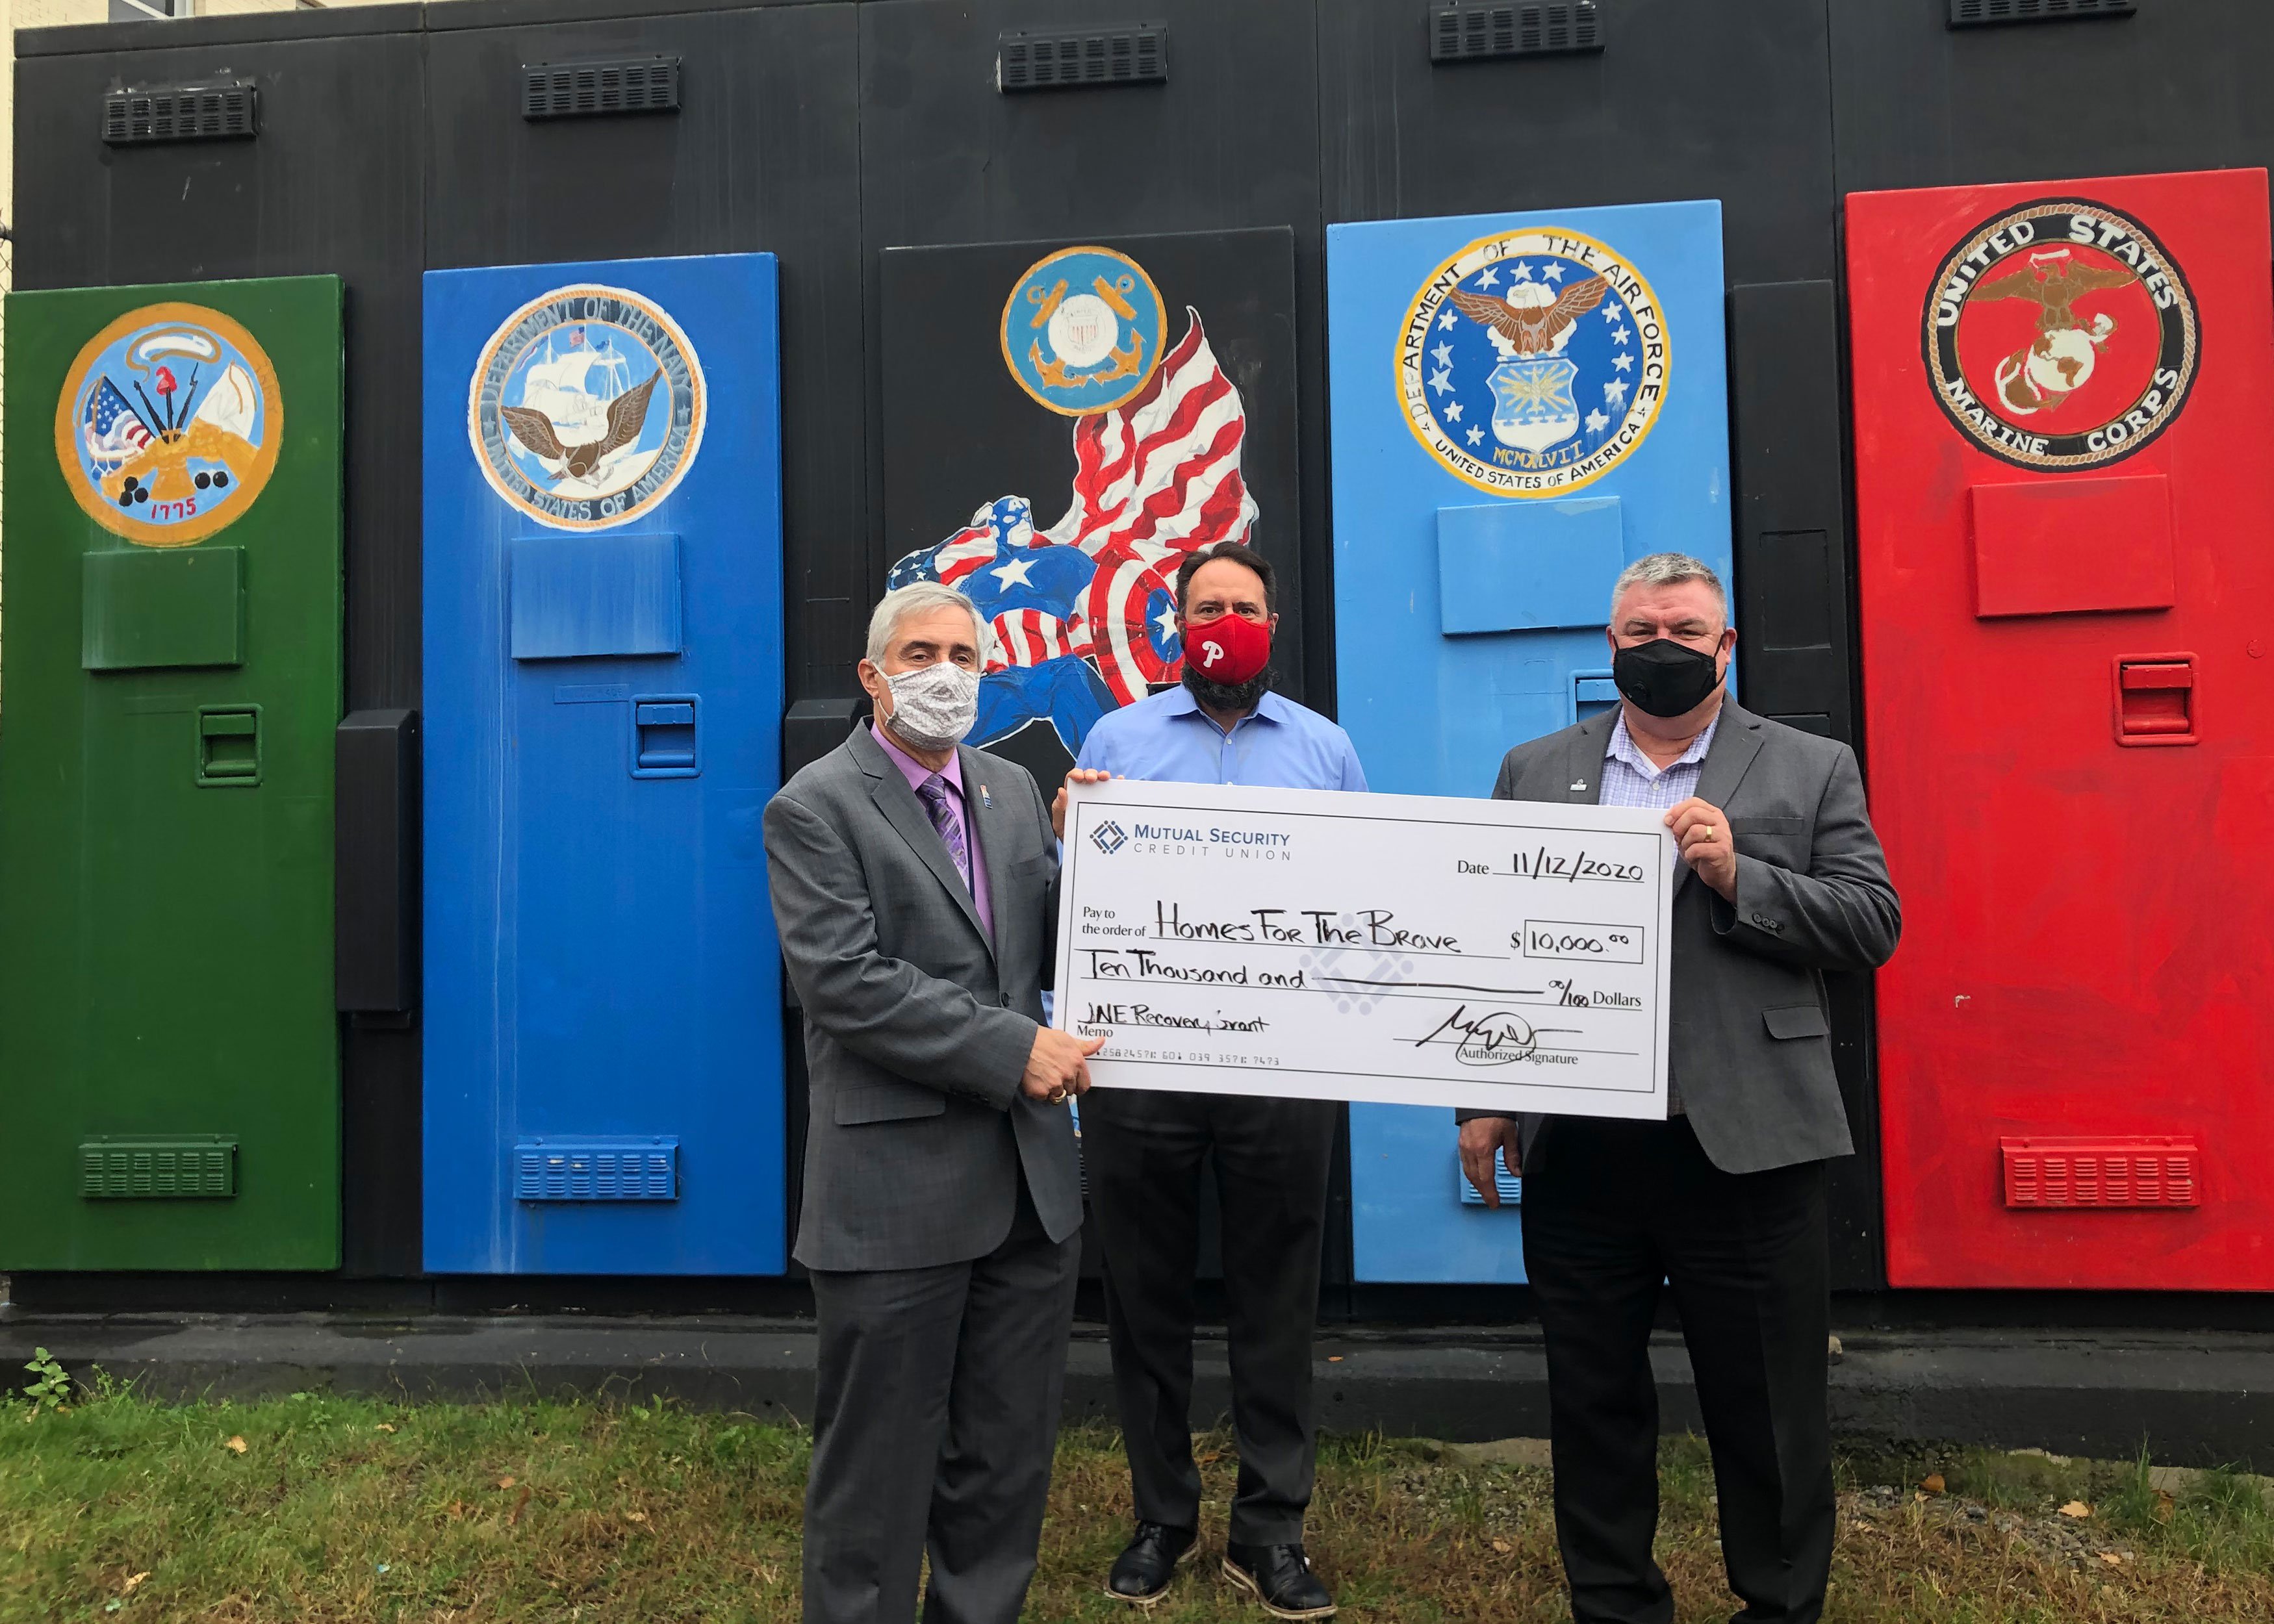 MSCU-Presents-Homes-for-the-Brave-10000-Grant